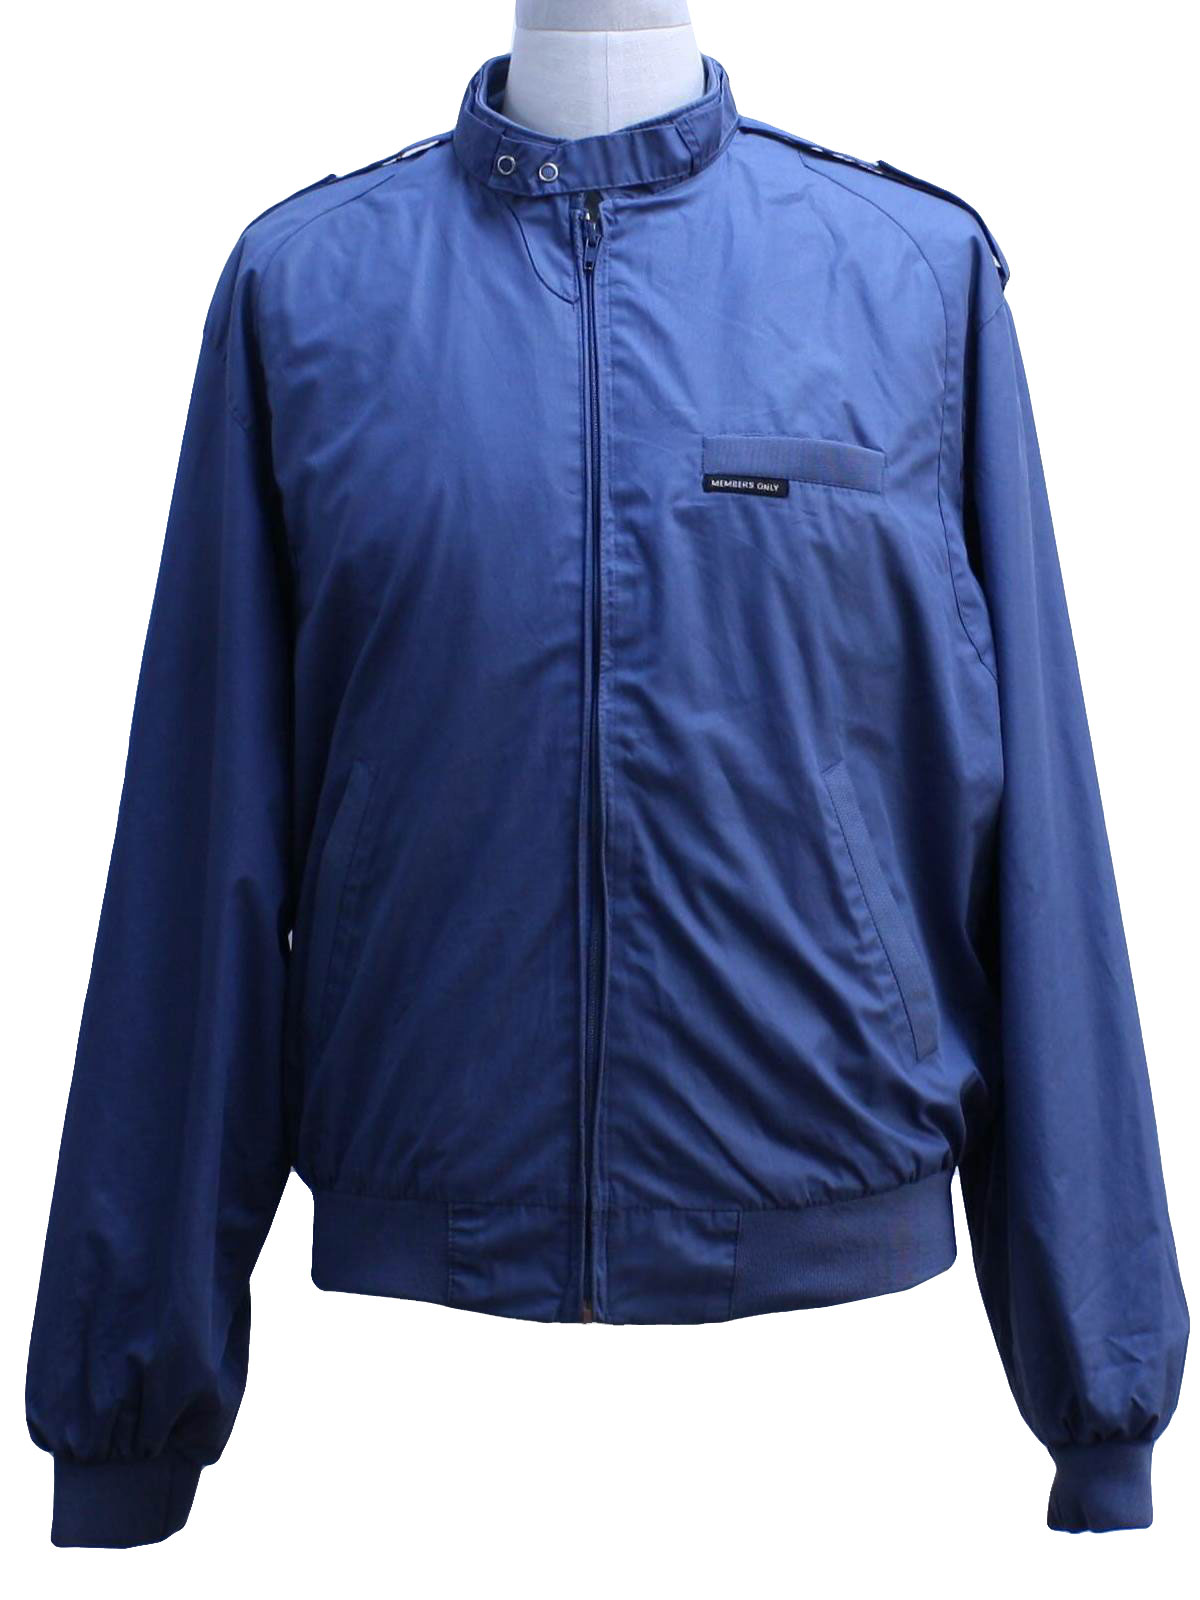 Retro 1980s Jacket: 80s style -Members Only- Mens blue cotton polyester ...